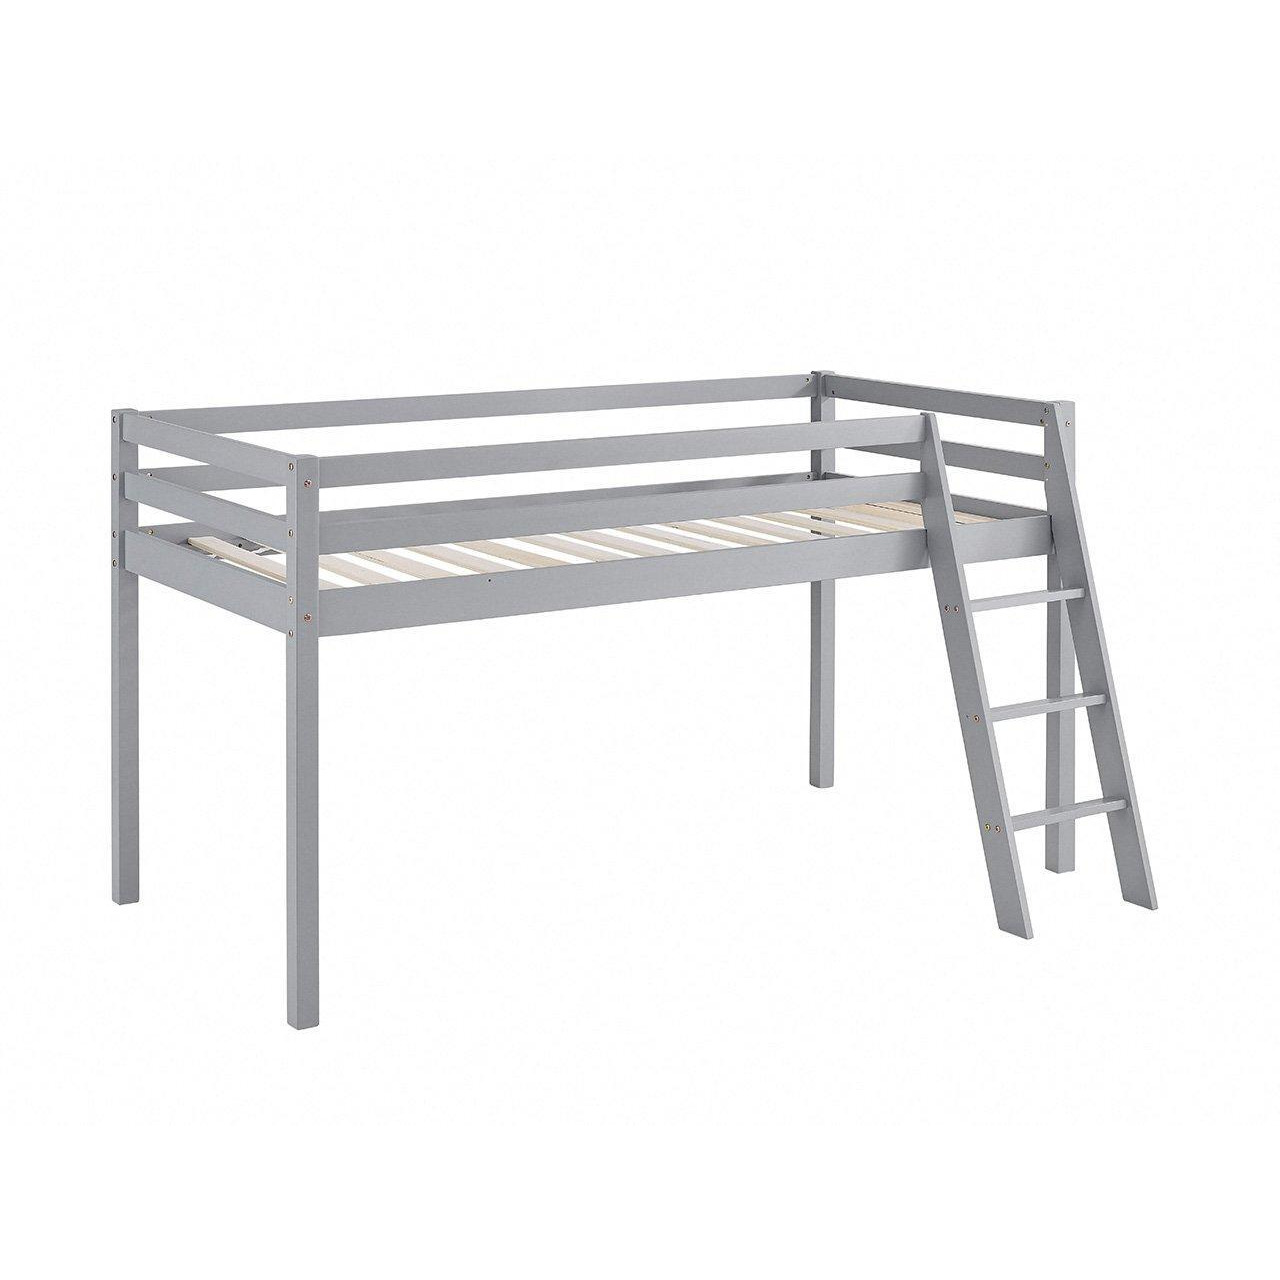 Albany Wooden Mid-Sleeper Bunk Bed - image 1